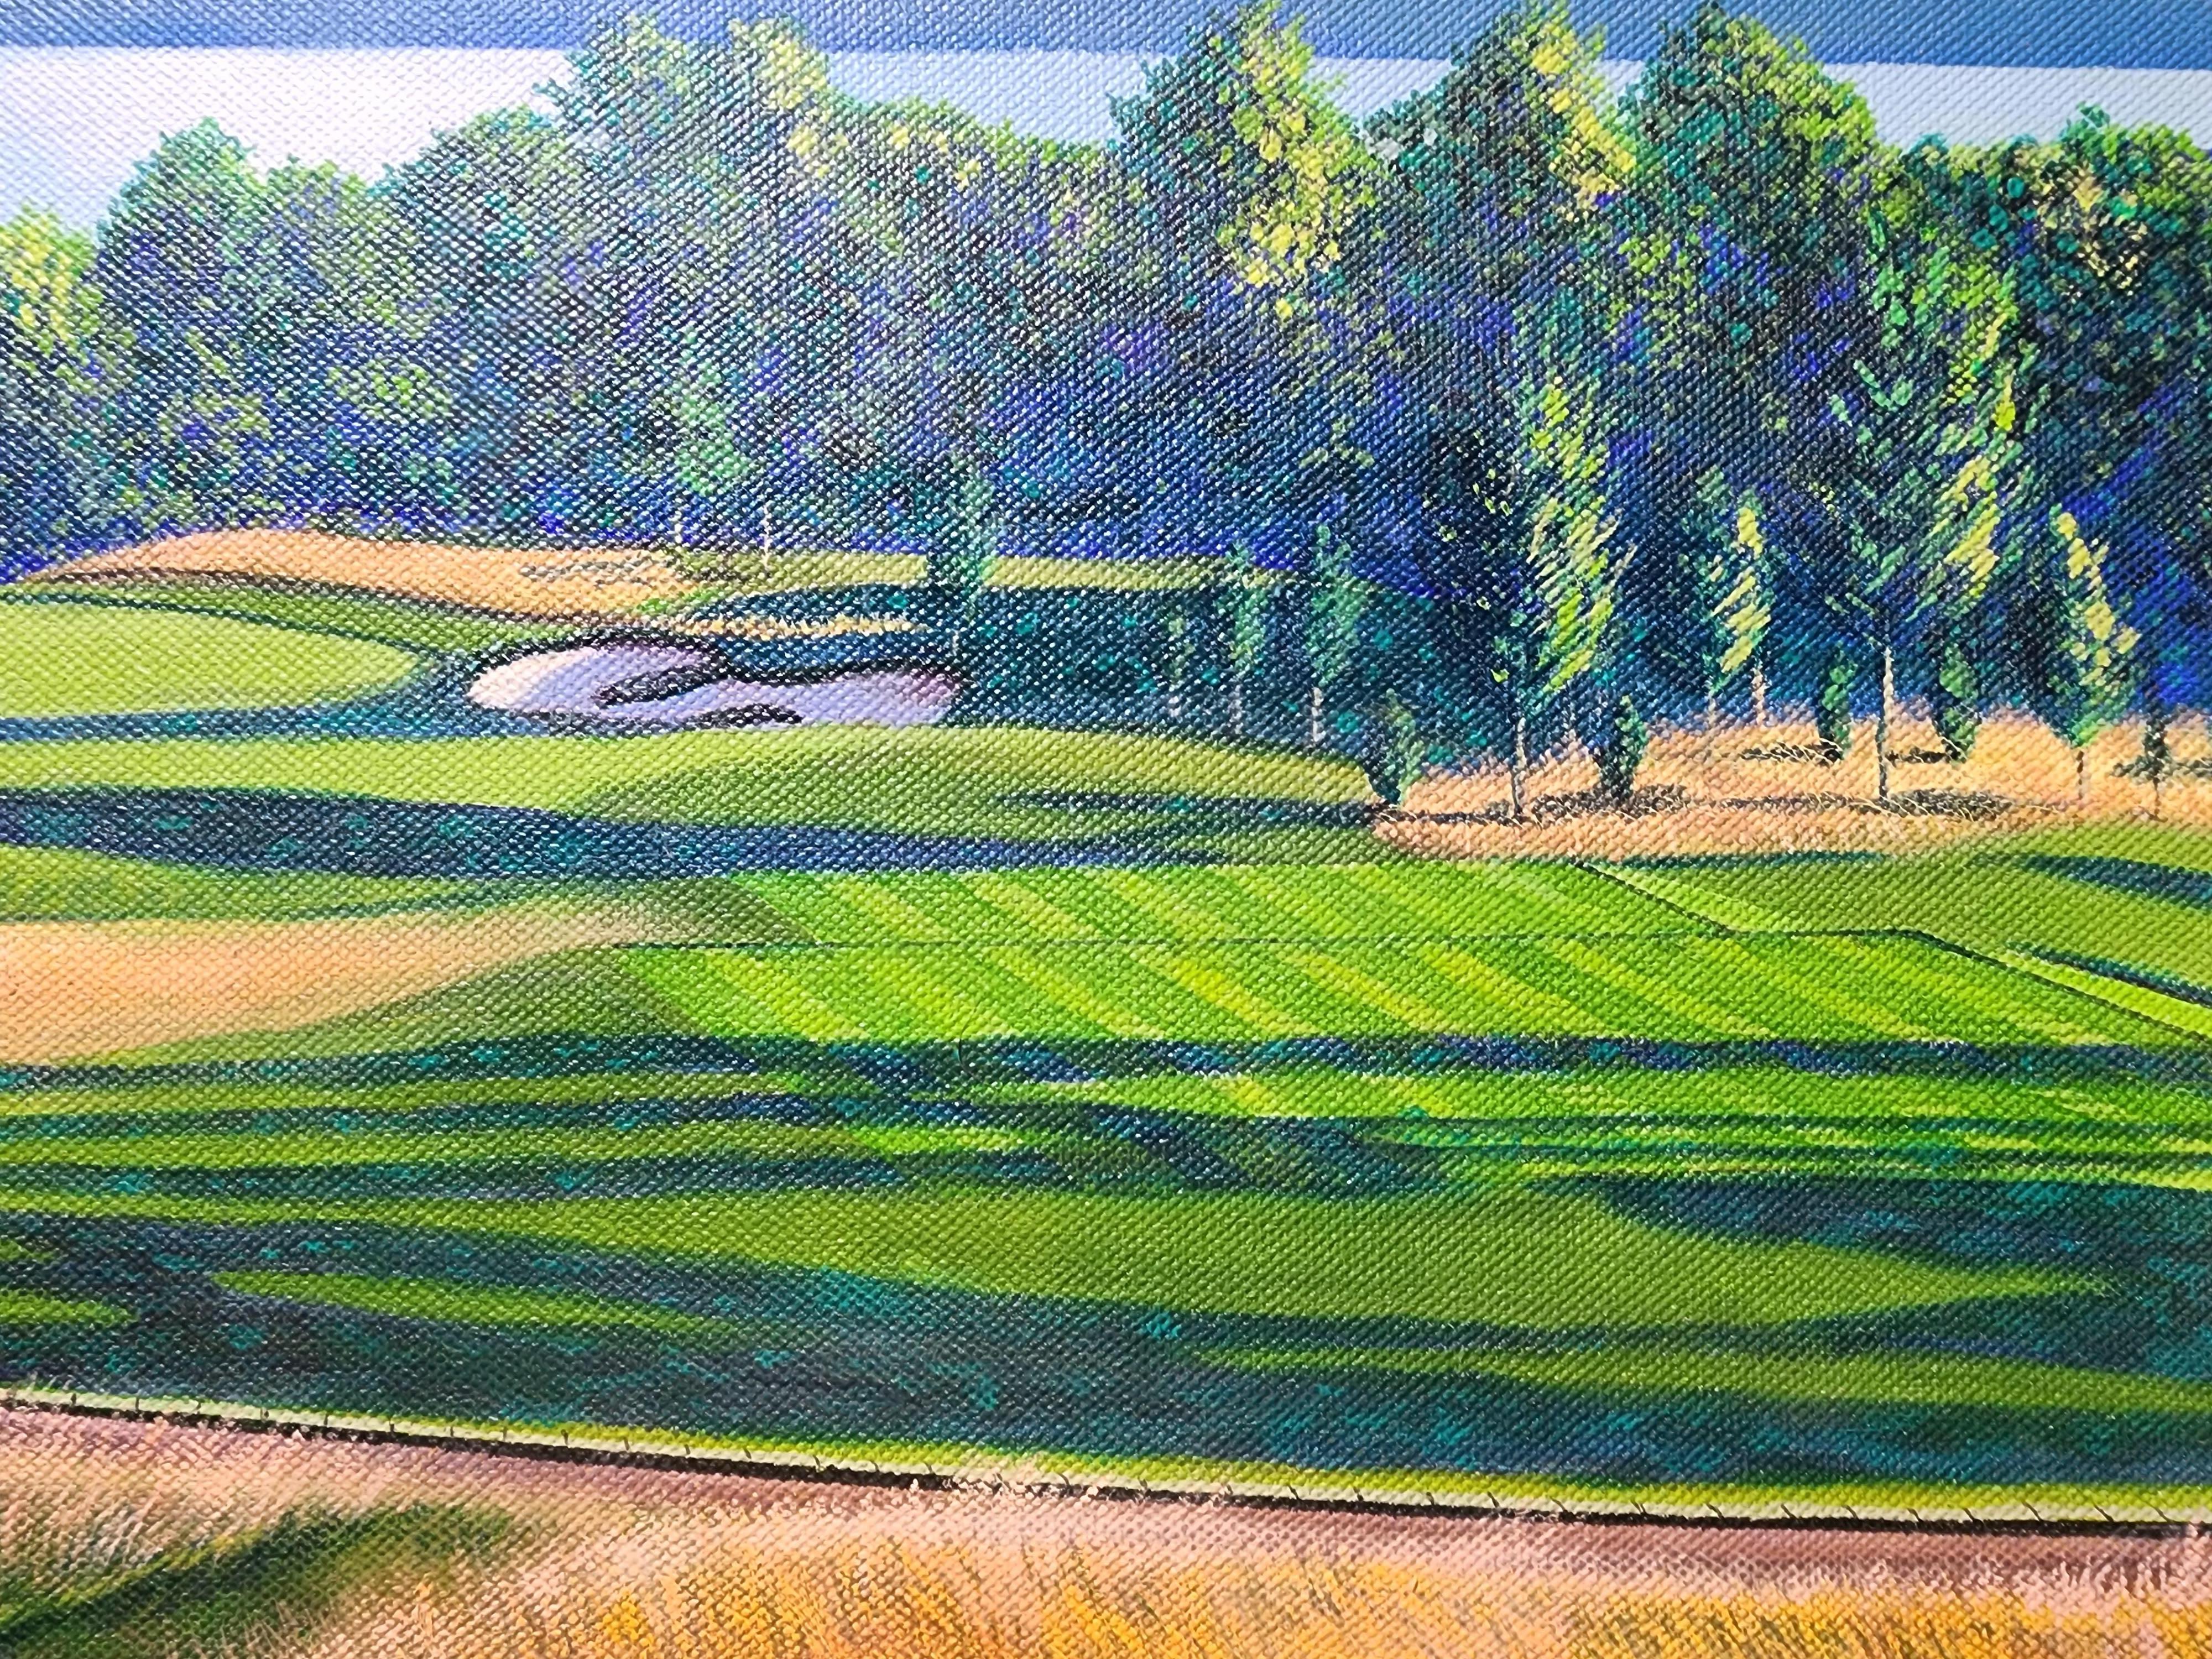 #16@ Croton on Hudson County Club - Realist Painting by Donald Moss